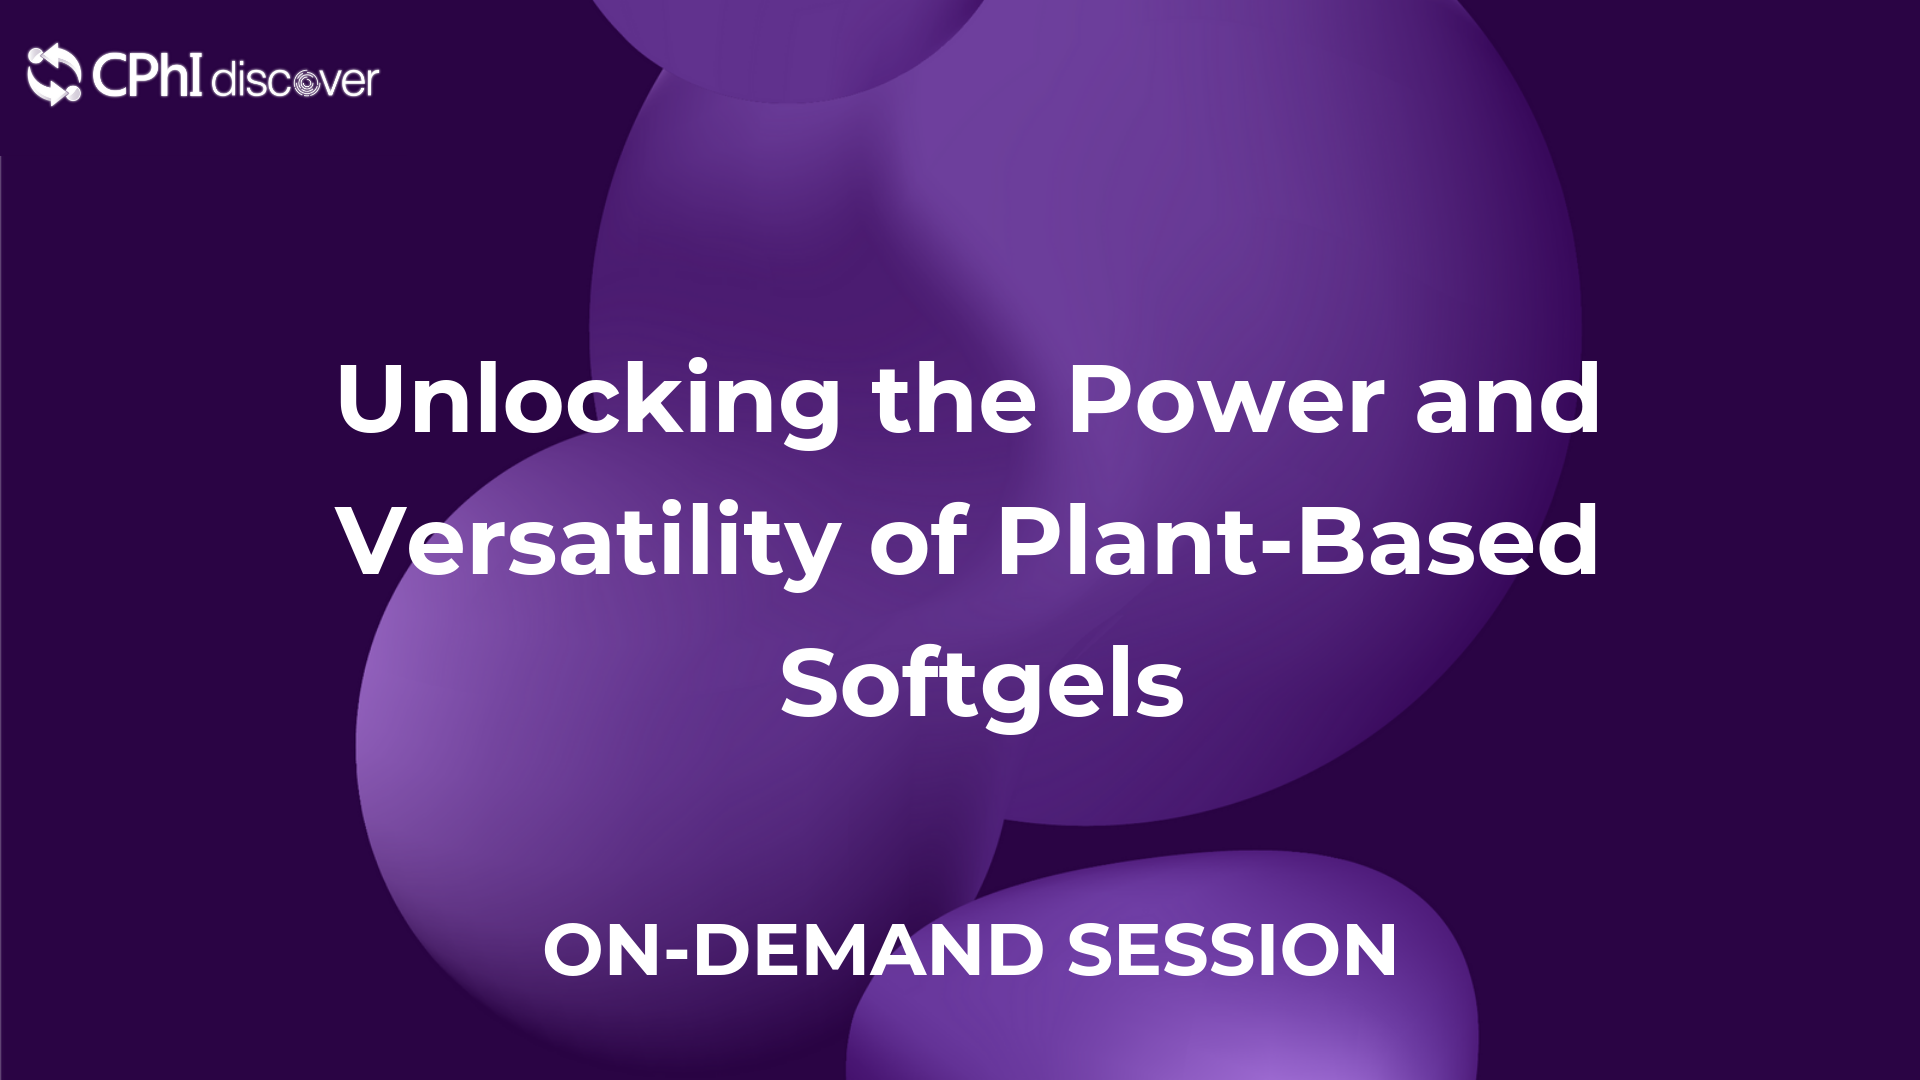 Unlocking the Power and Versatility of Plant-Based Softgels